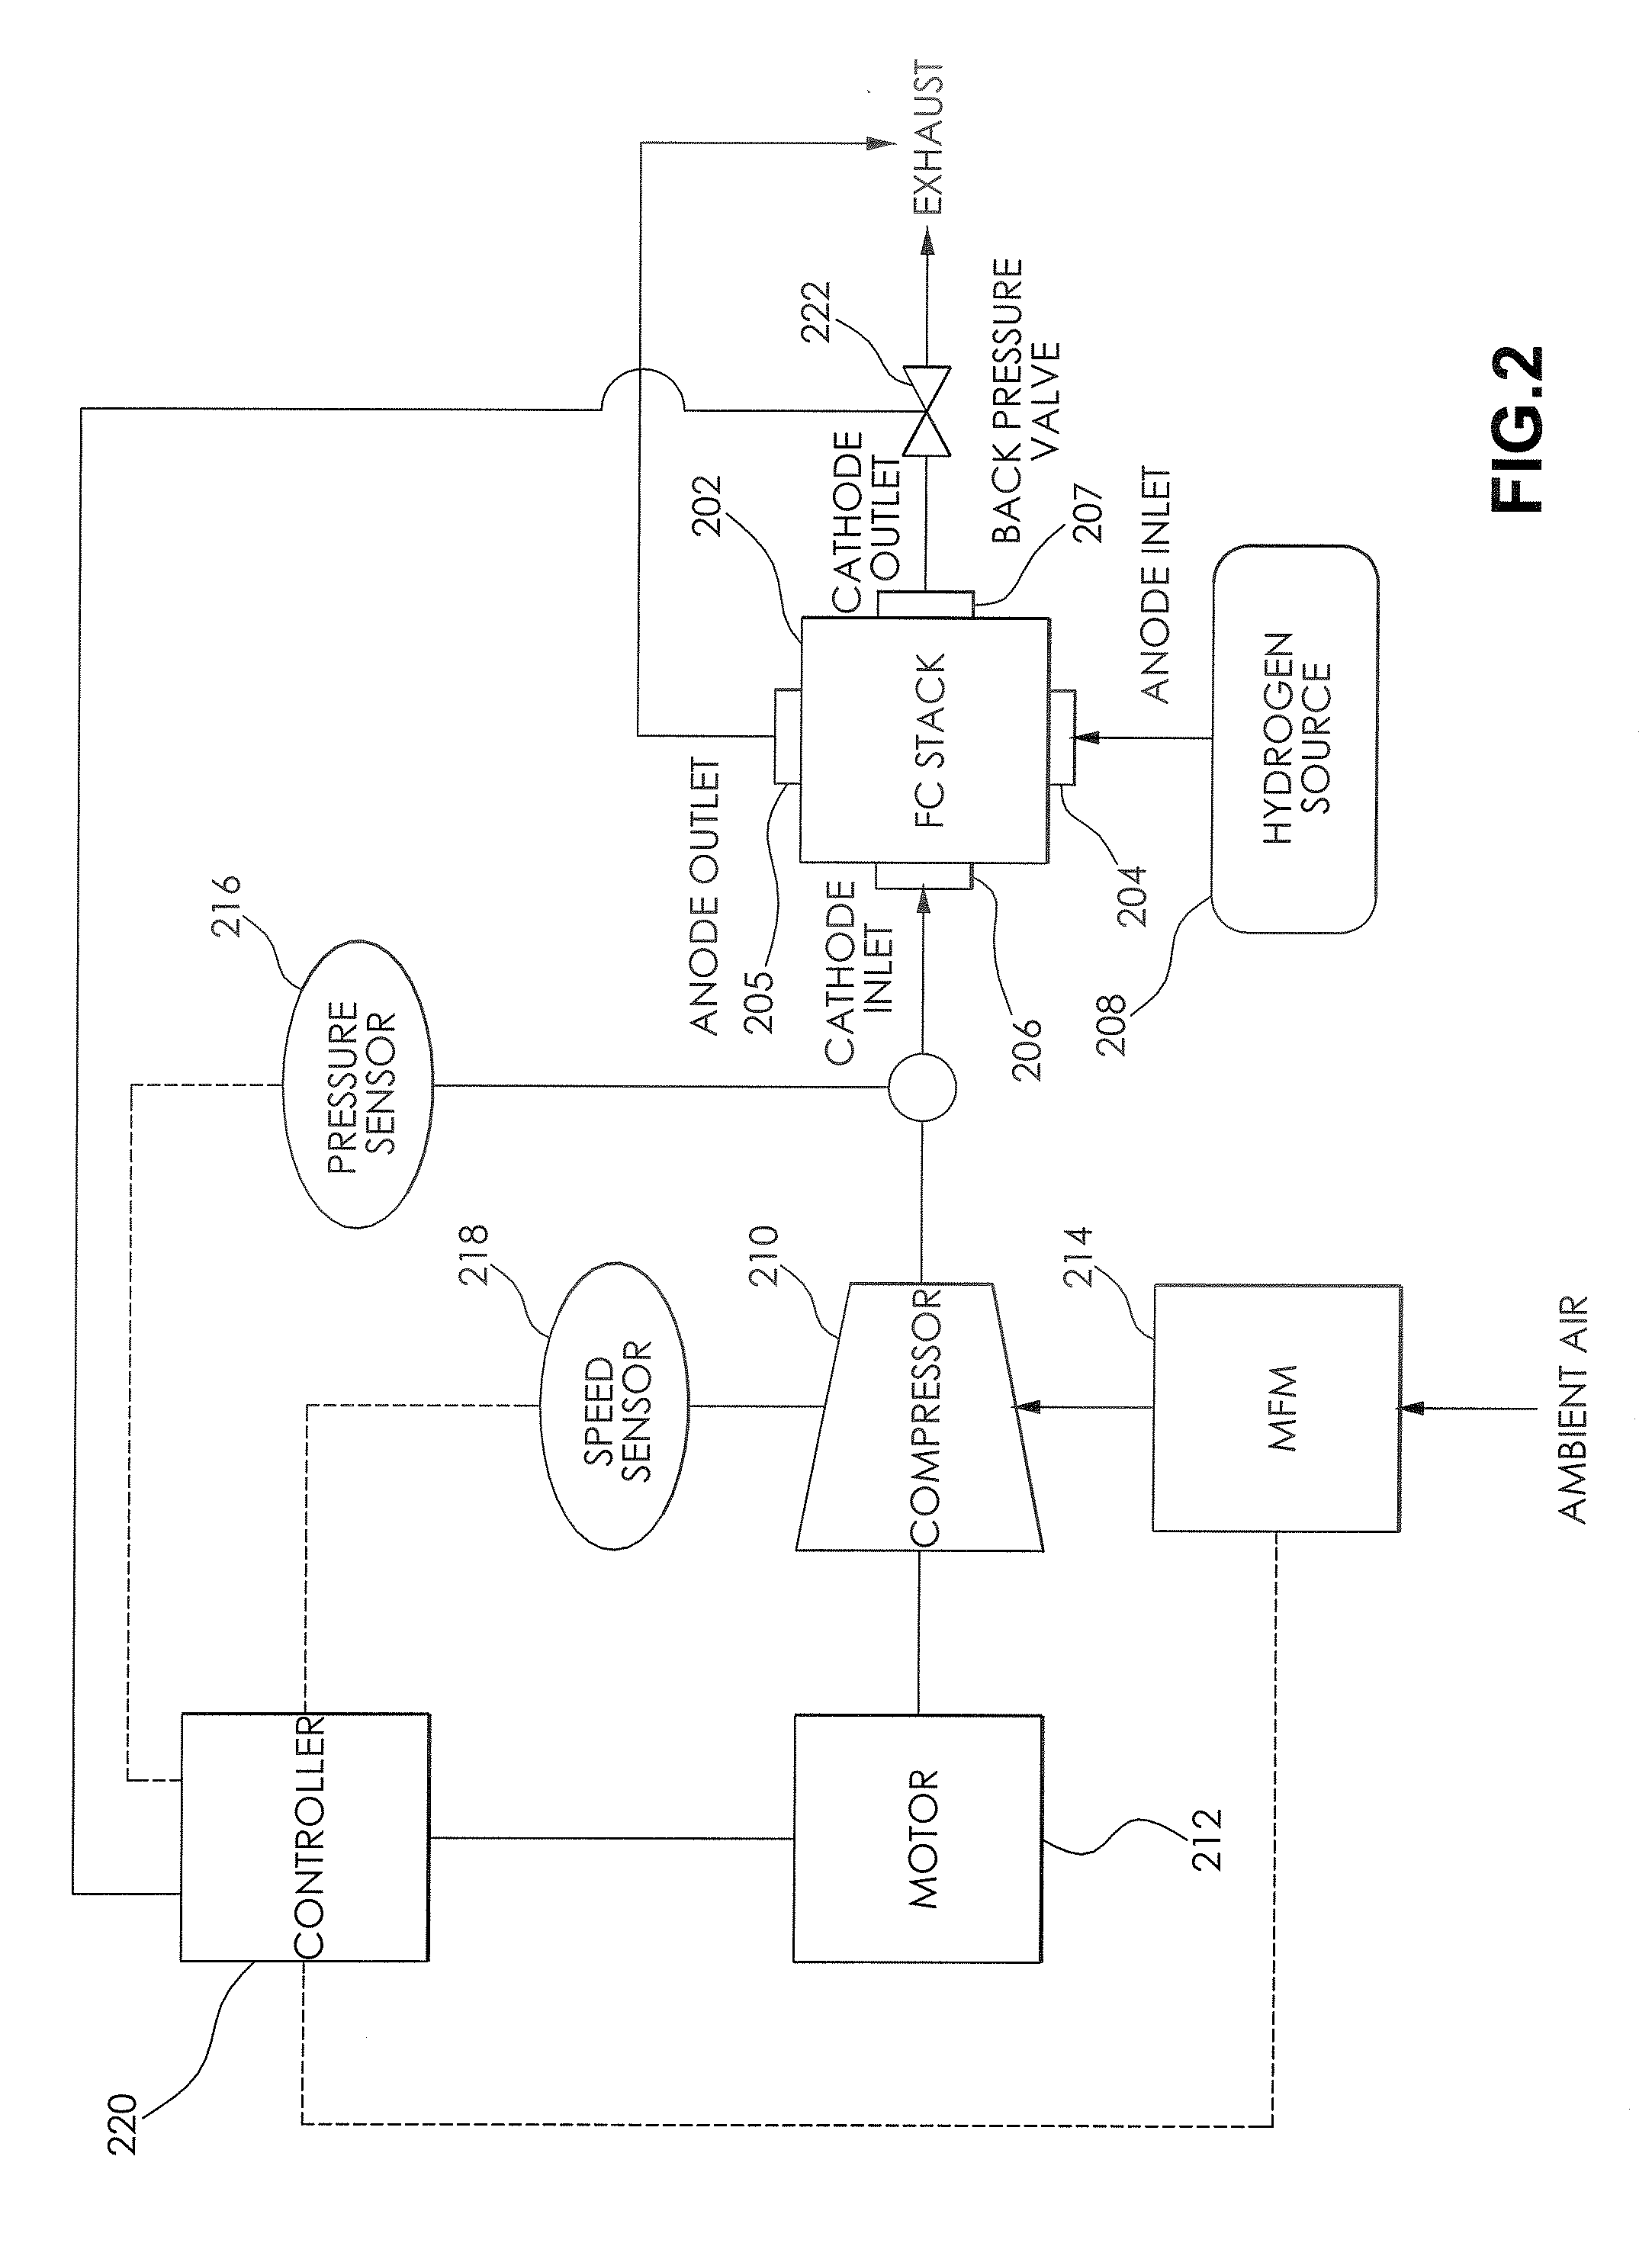 Adaptive compressor surge control in a fuel cell system